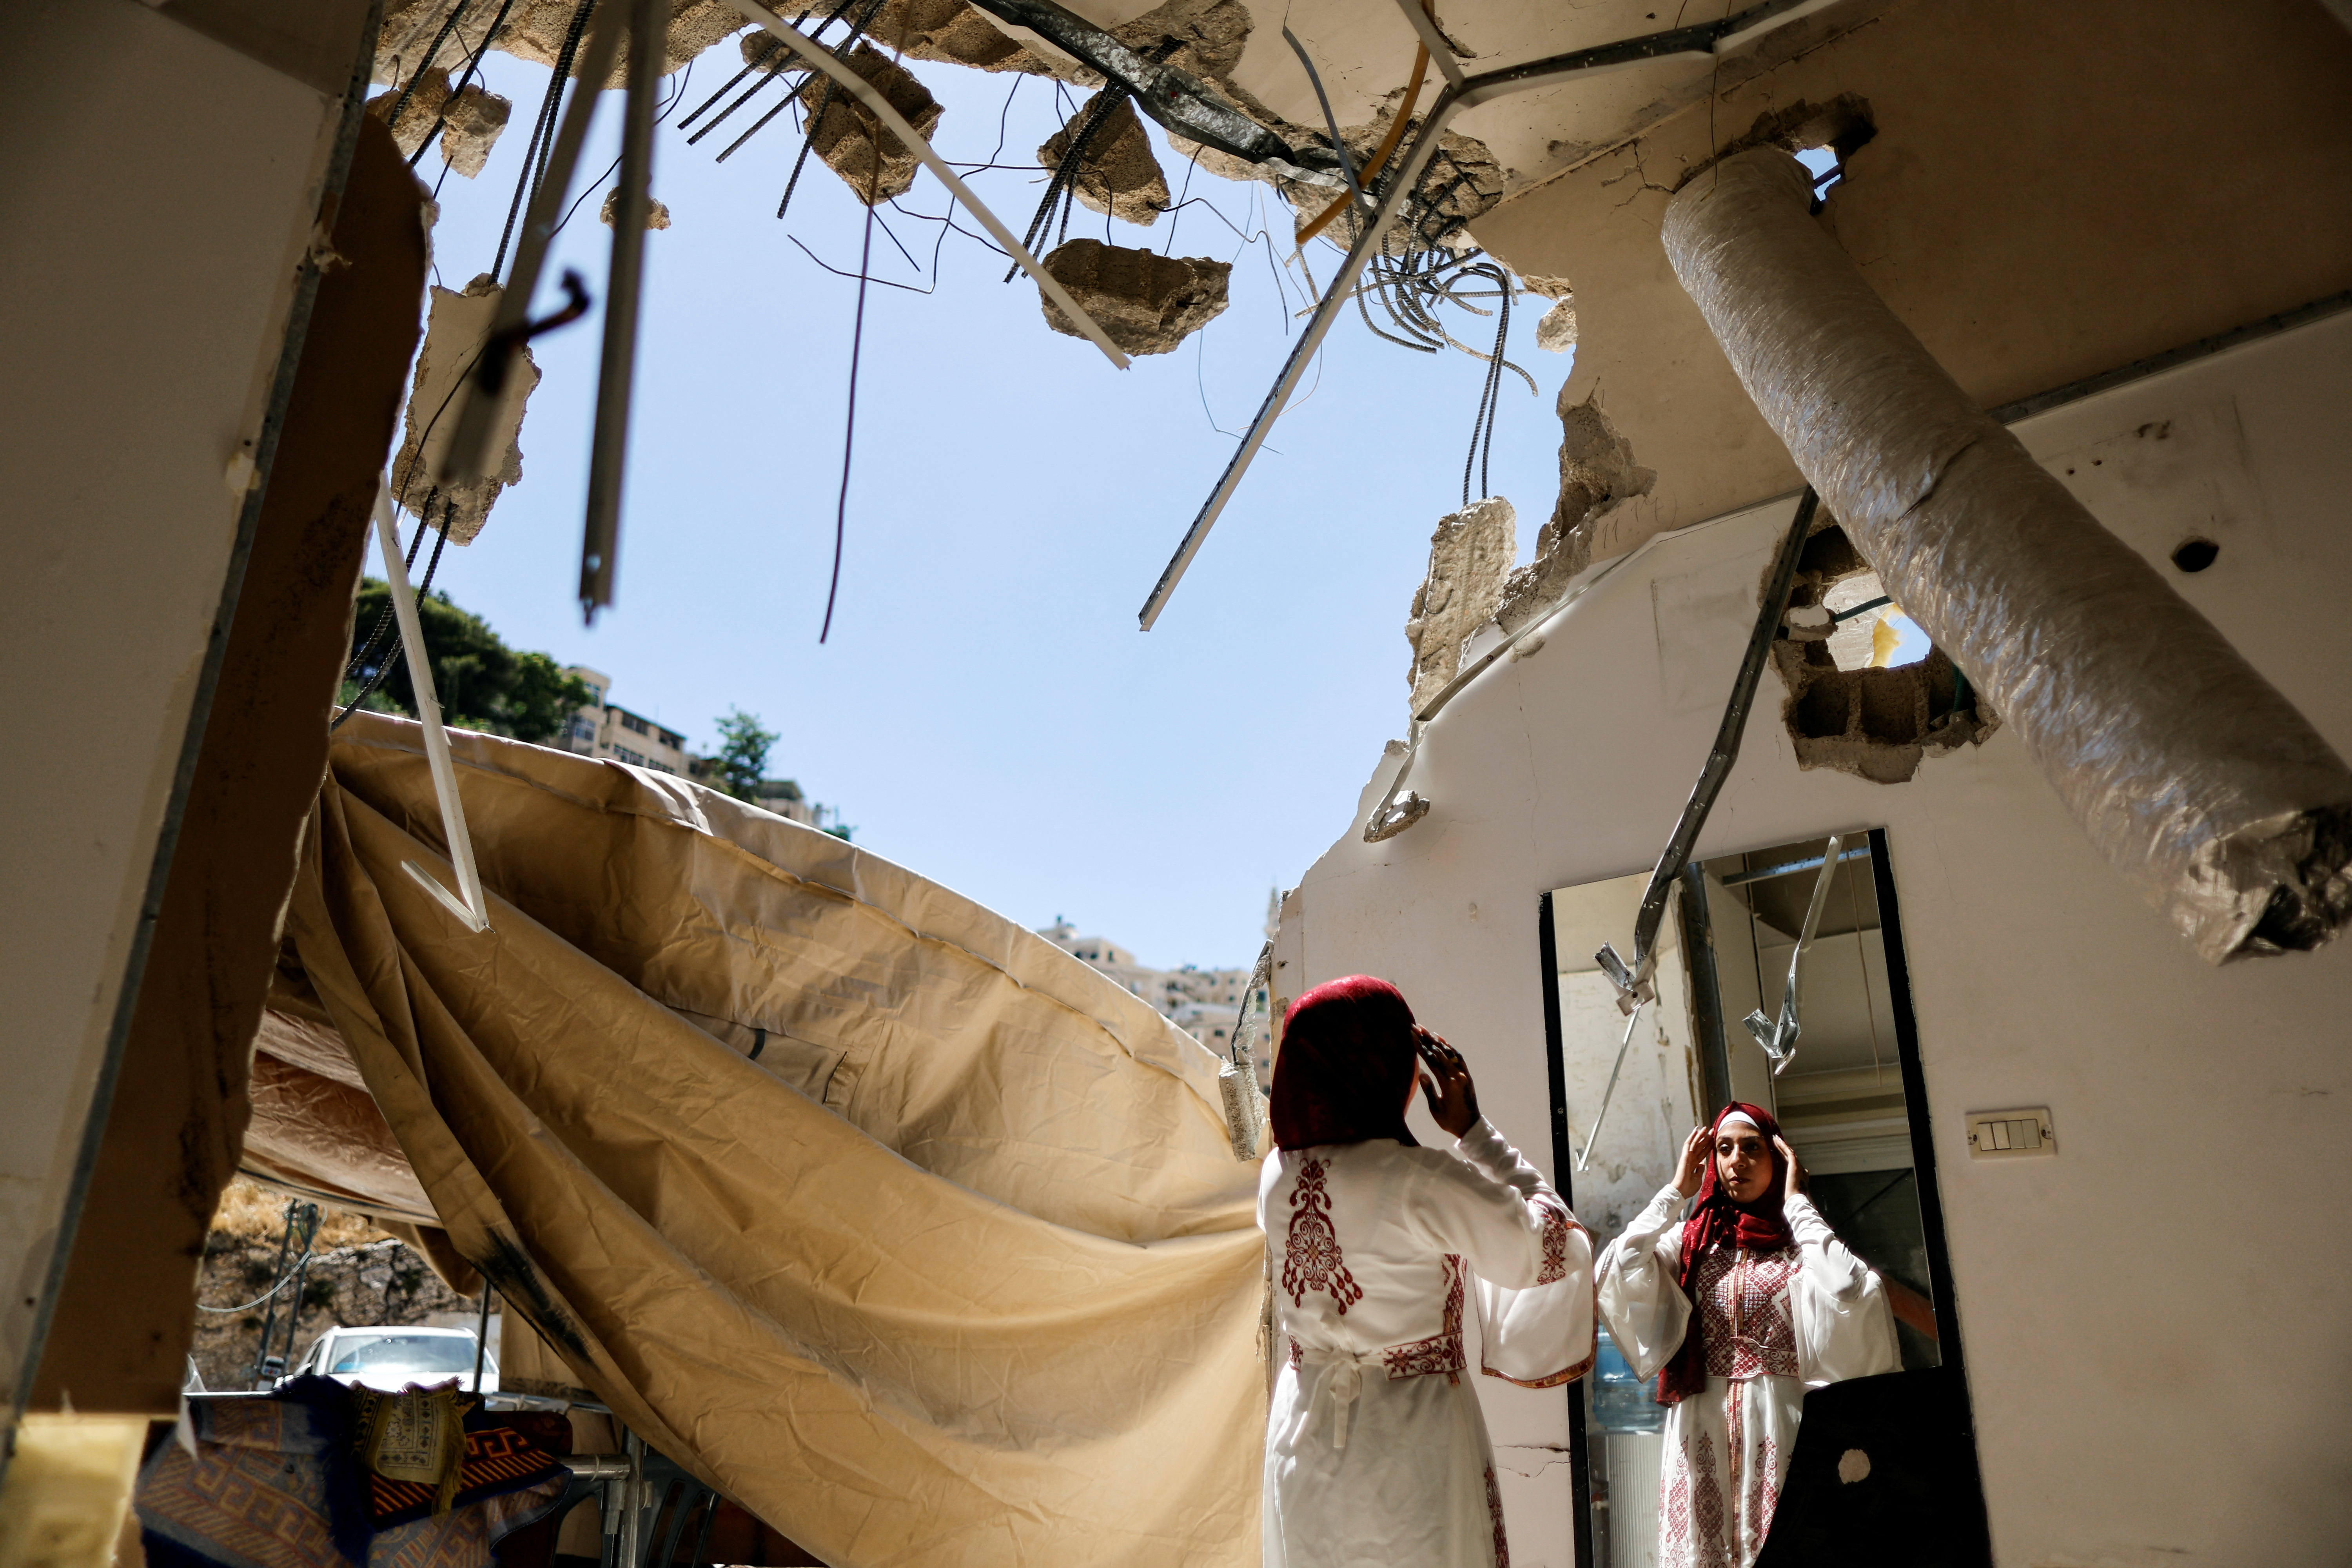 Palestinian bride Rabeha Al-Rajabi looks in the mirror at her house, that was partly demolished by Israeli authority, as part of her pre-wedding ceremony in East Jerusalem